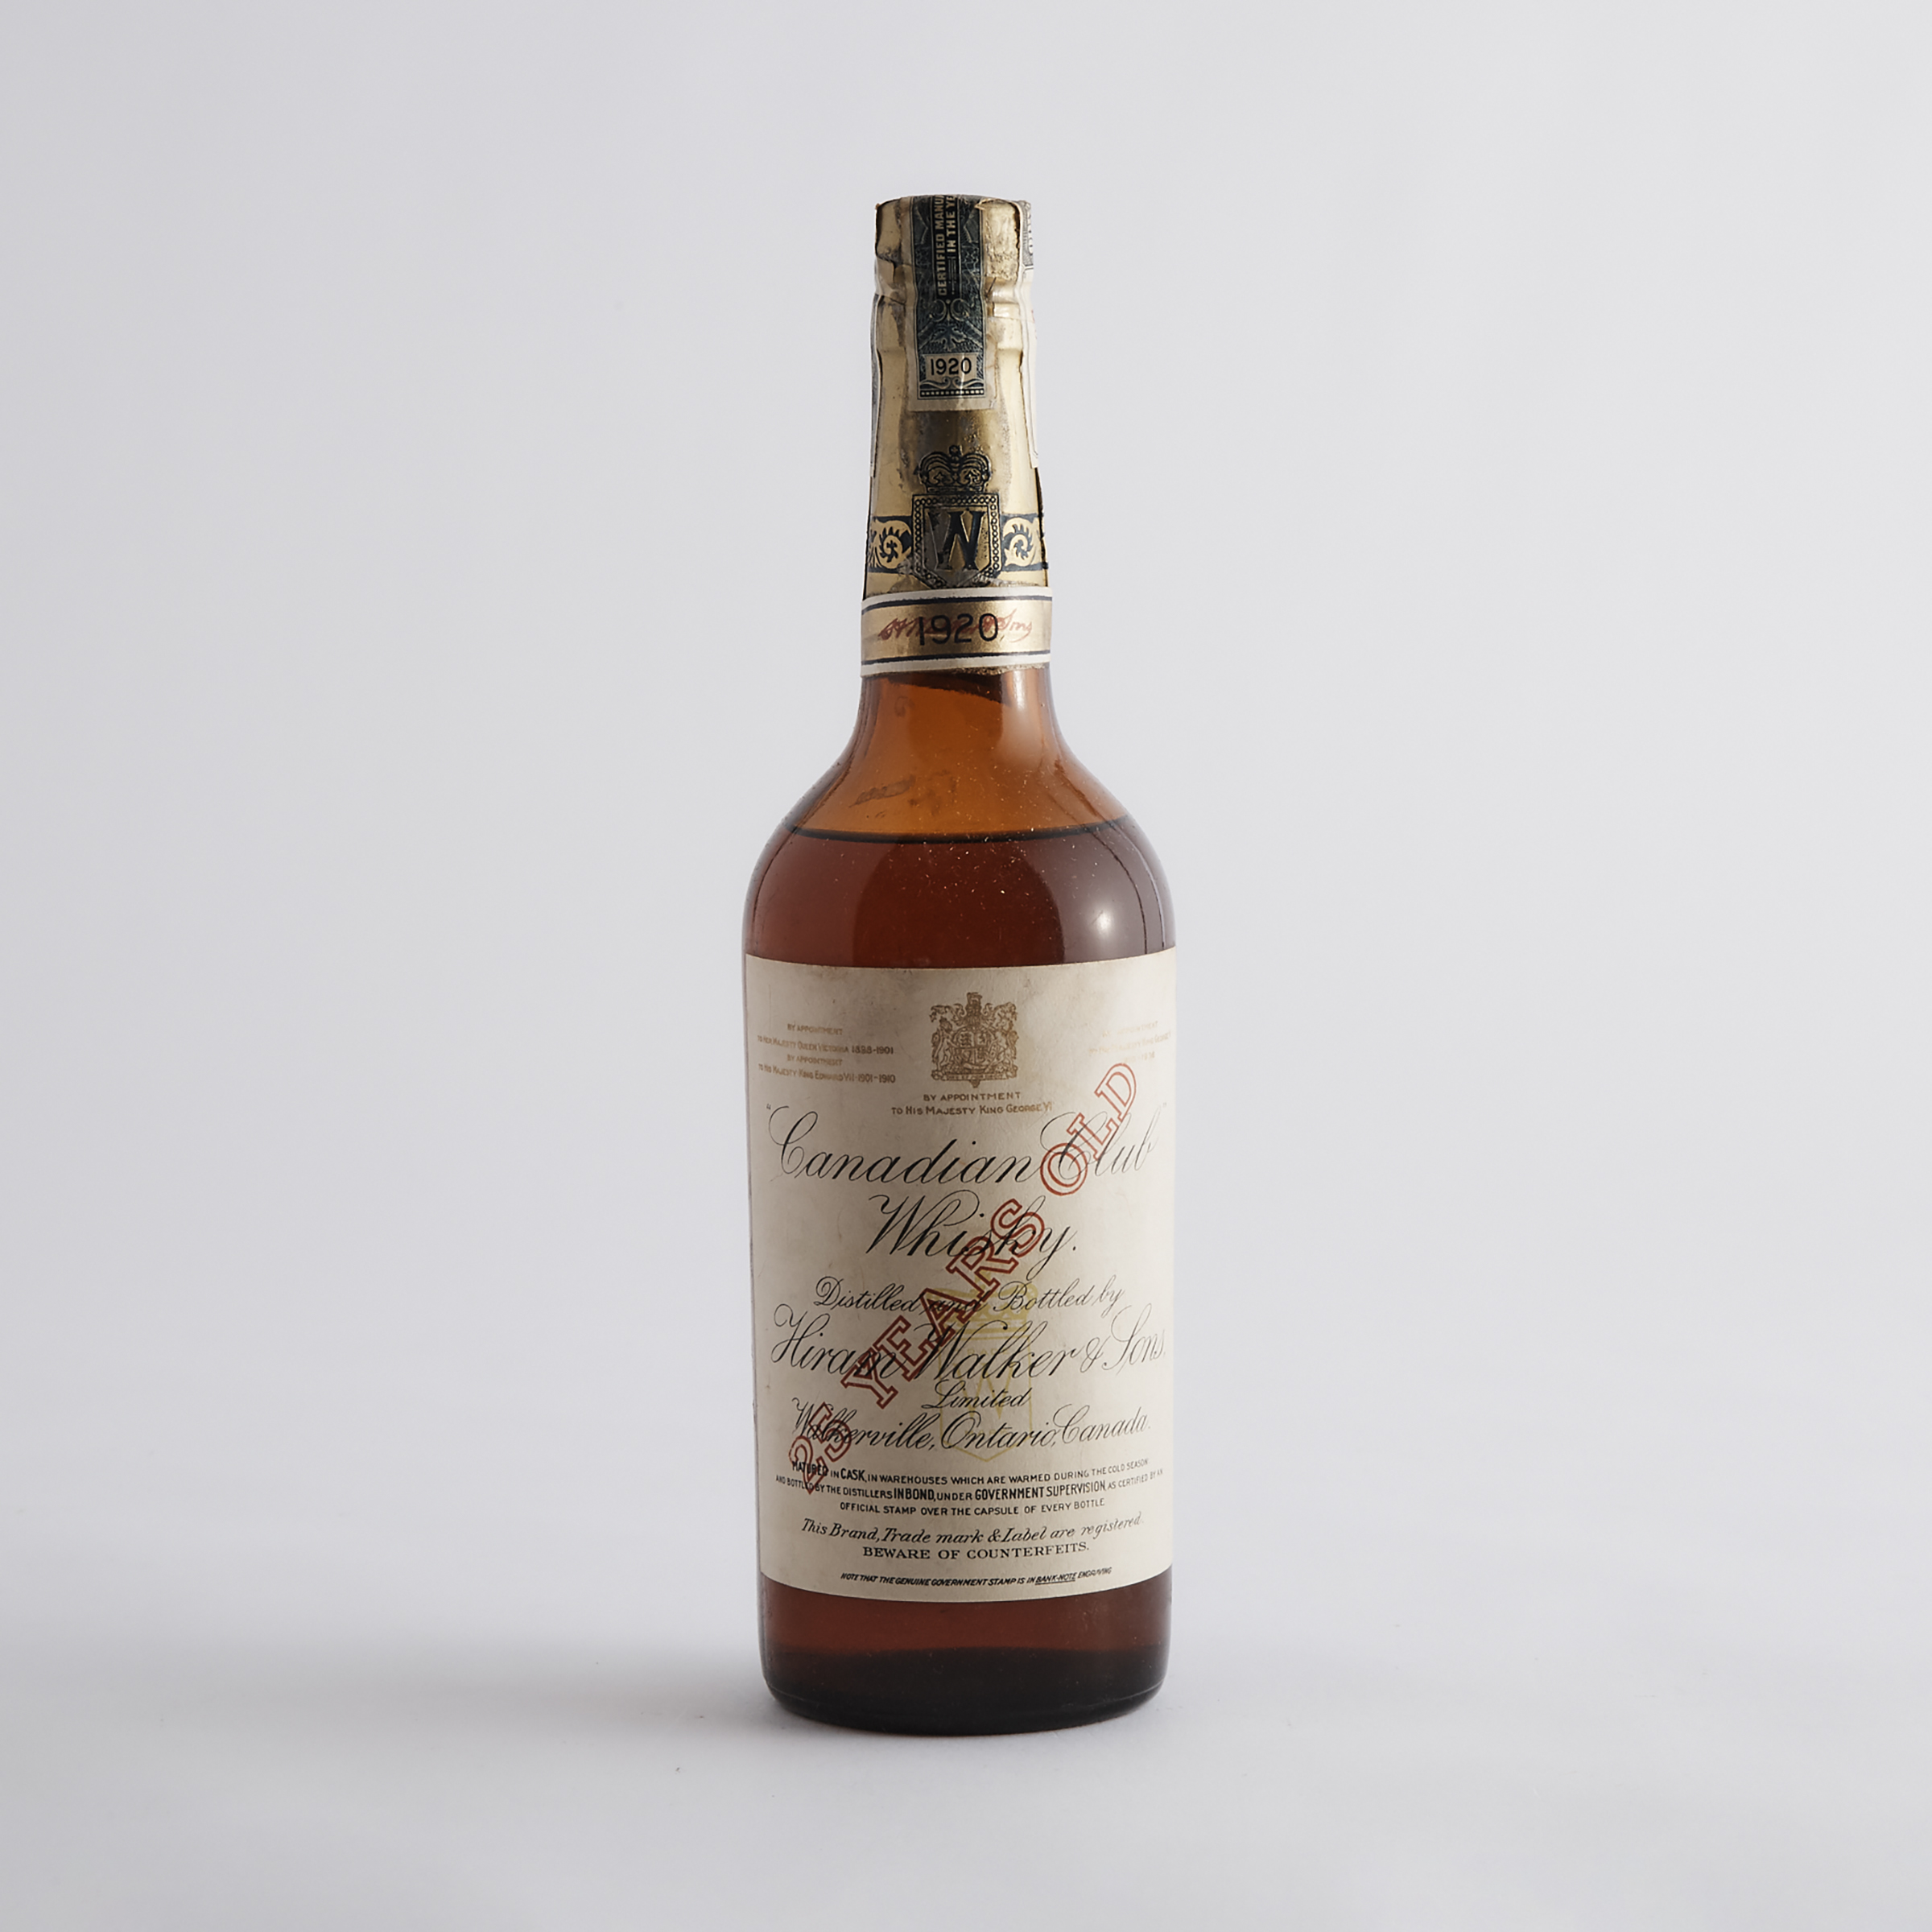 CANADIAN CLUB BLENDED CANADIAN WHISKY 25 YEARS (ONE 710 ML?)